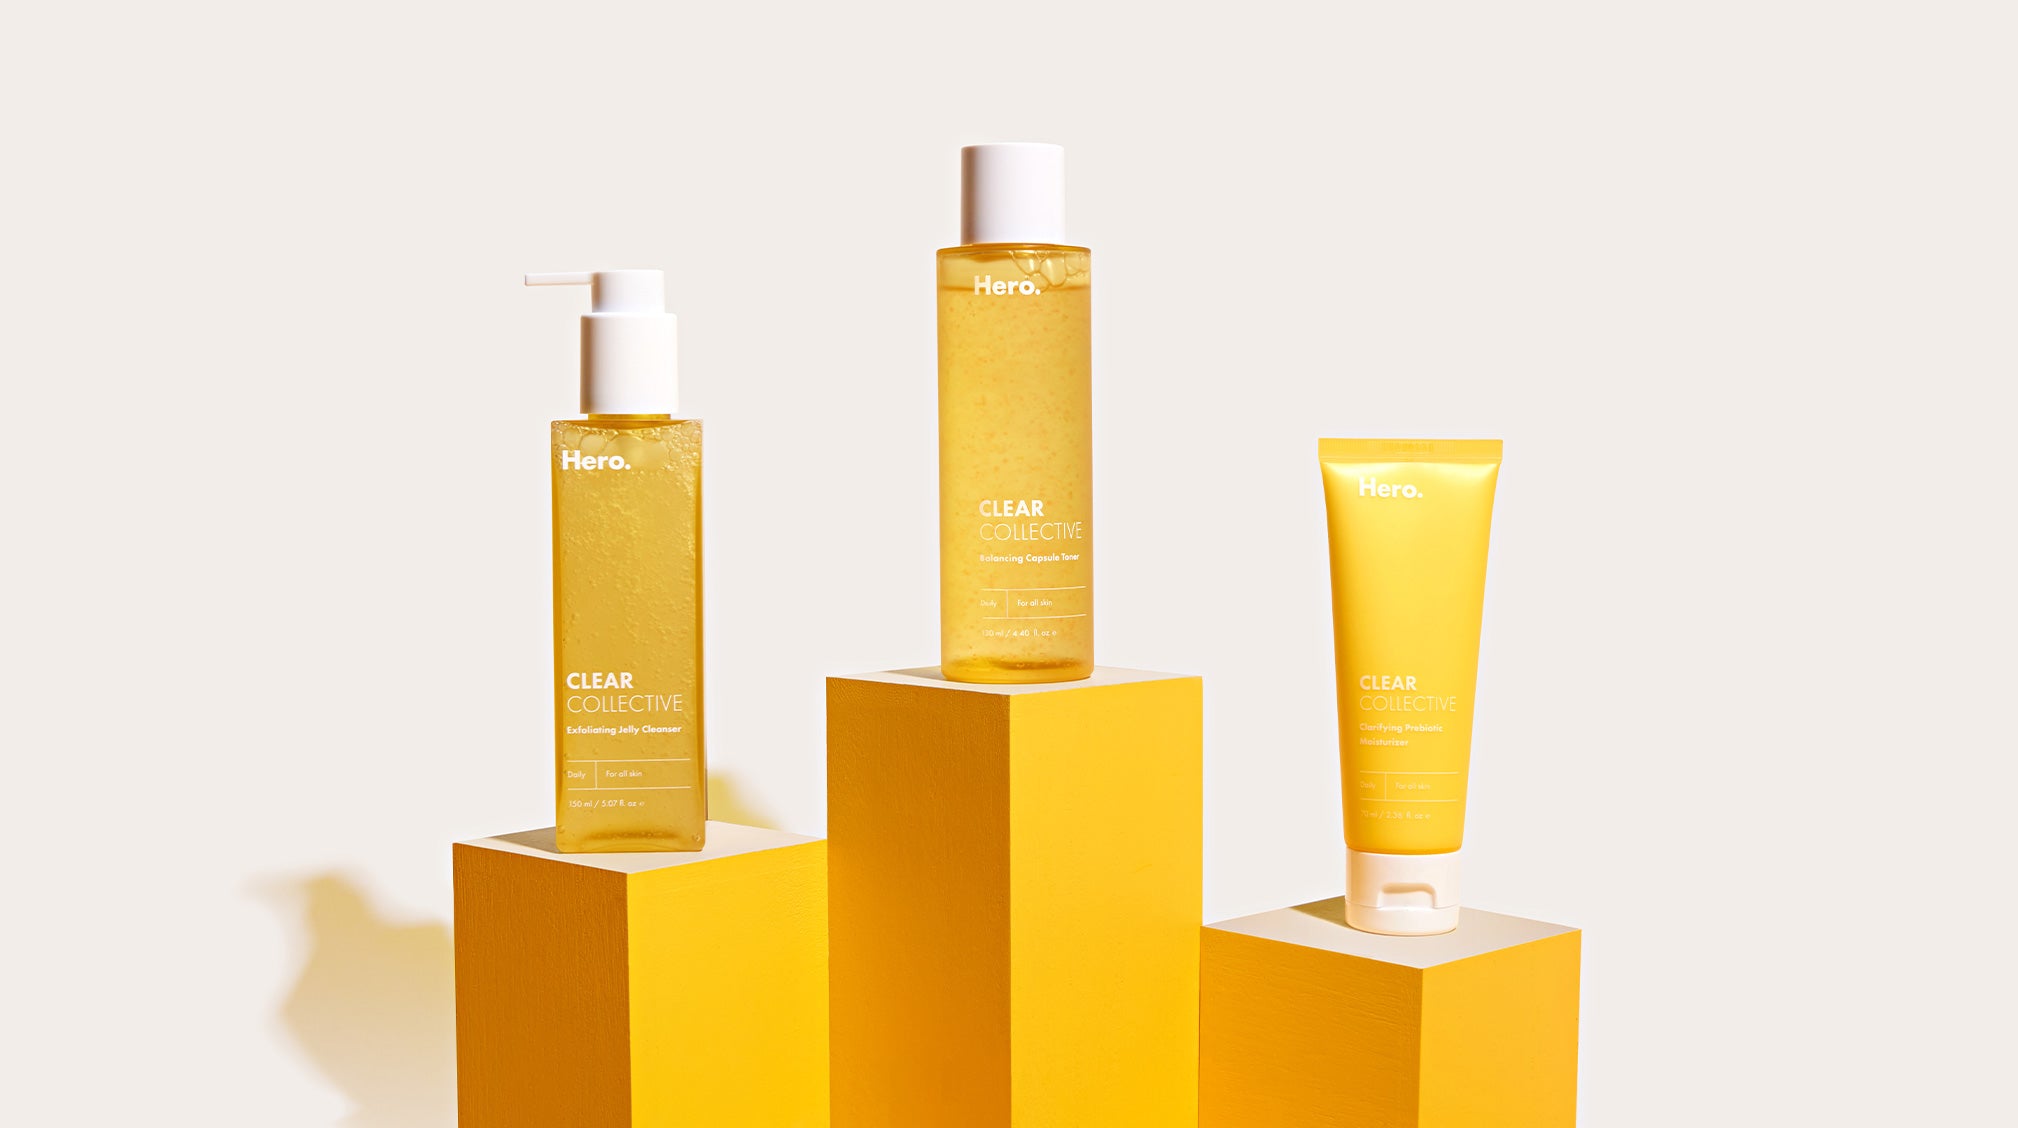 Meet Clear Collective: Your Super-Powered Skincare Set for Acne-Prone Skin